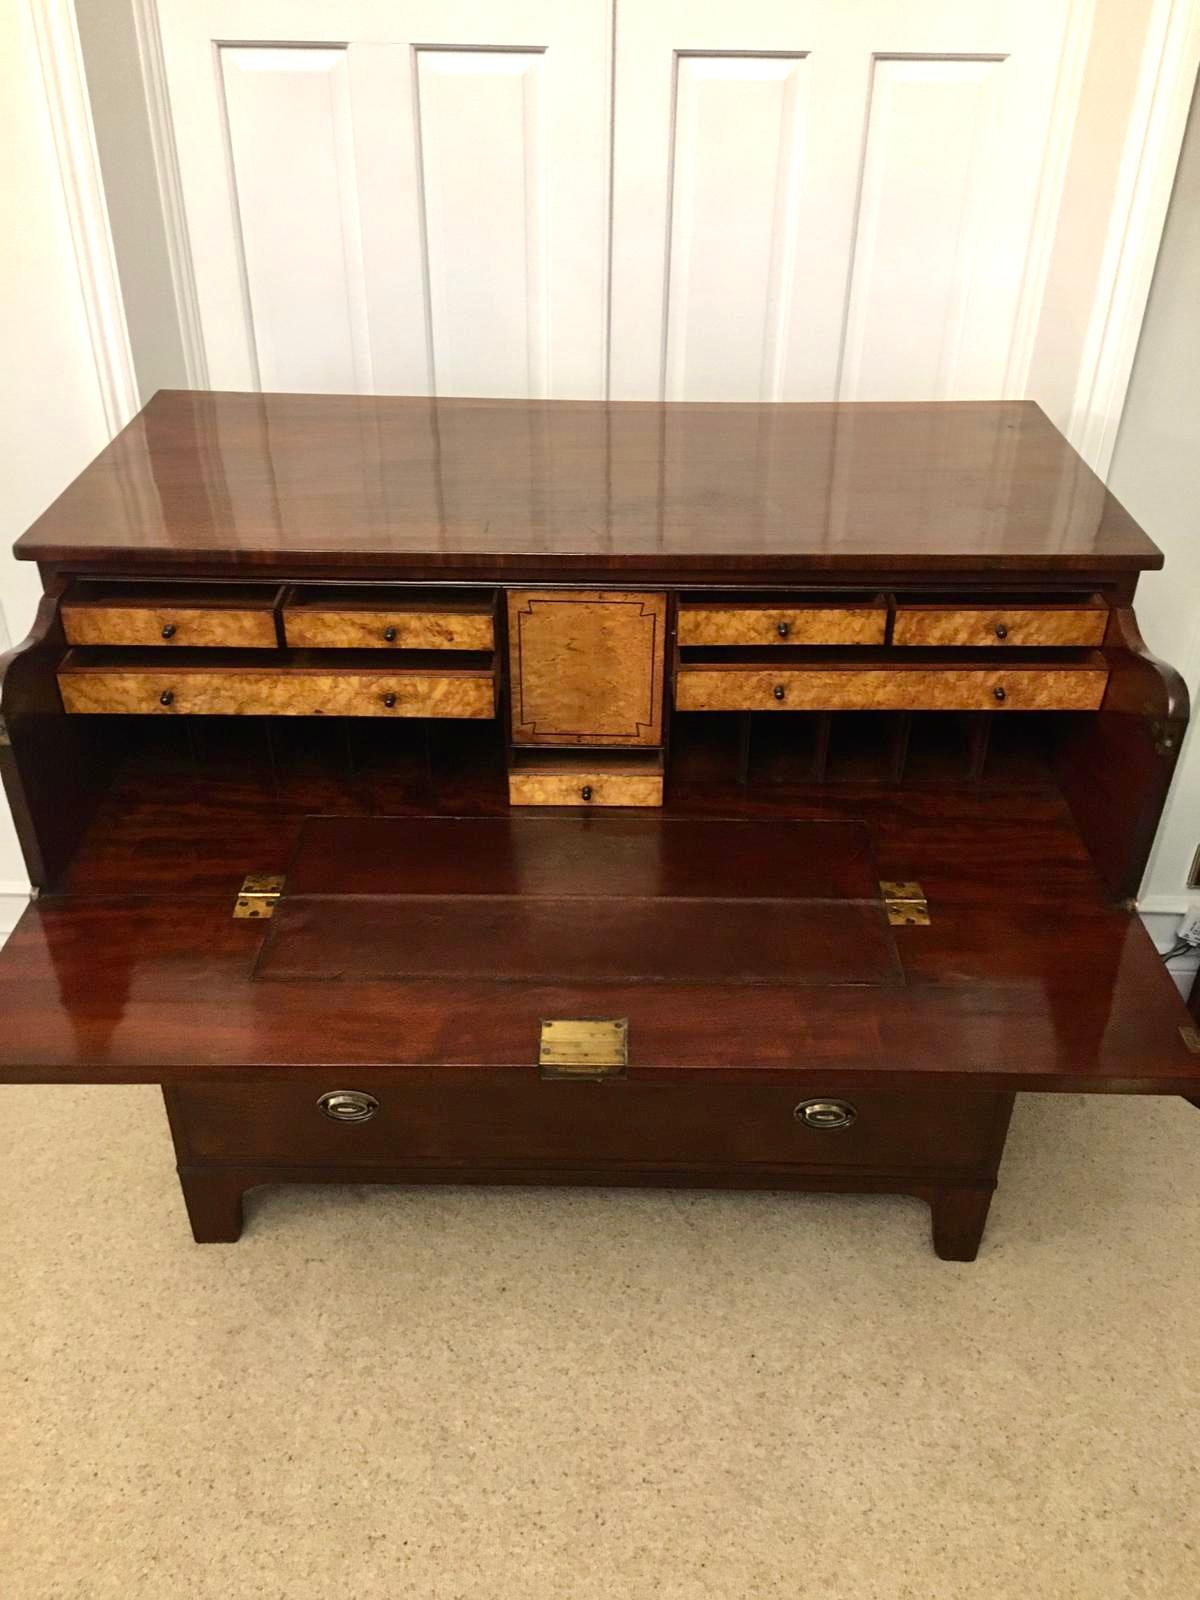 Brass Antique Early 19th Century George III Inlaid Mahogany Secretaire Chest For Sale